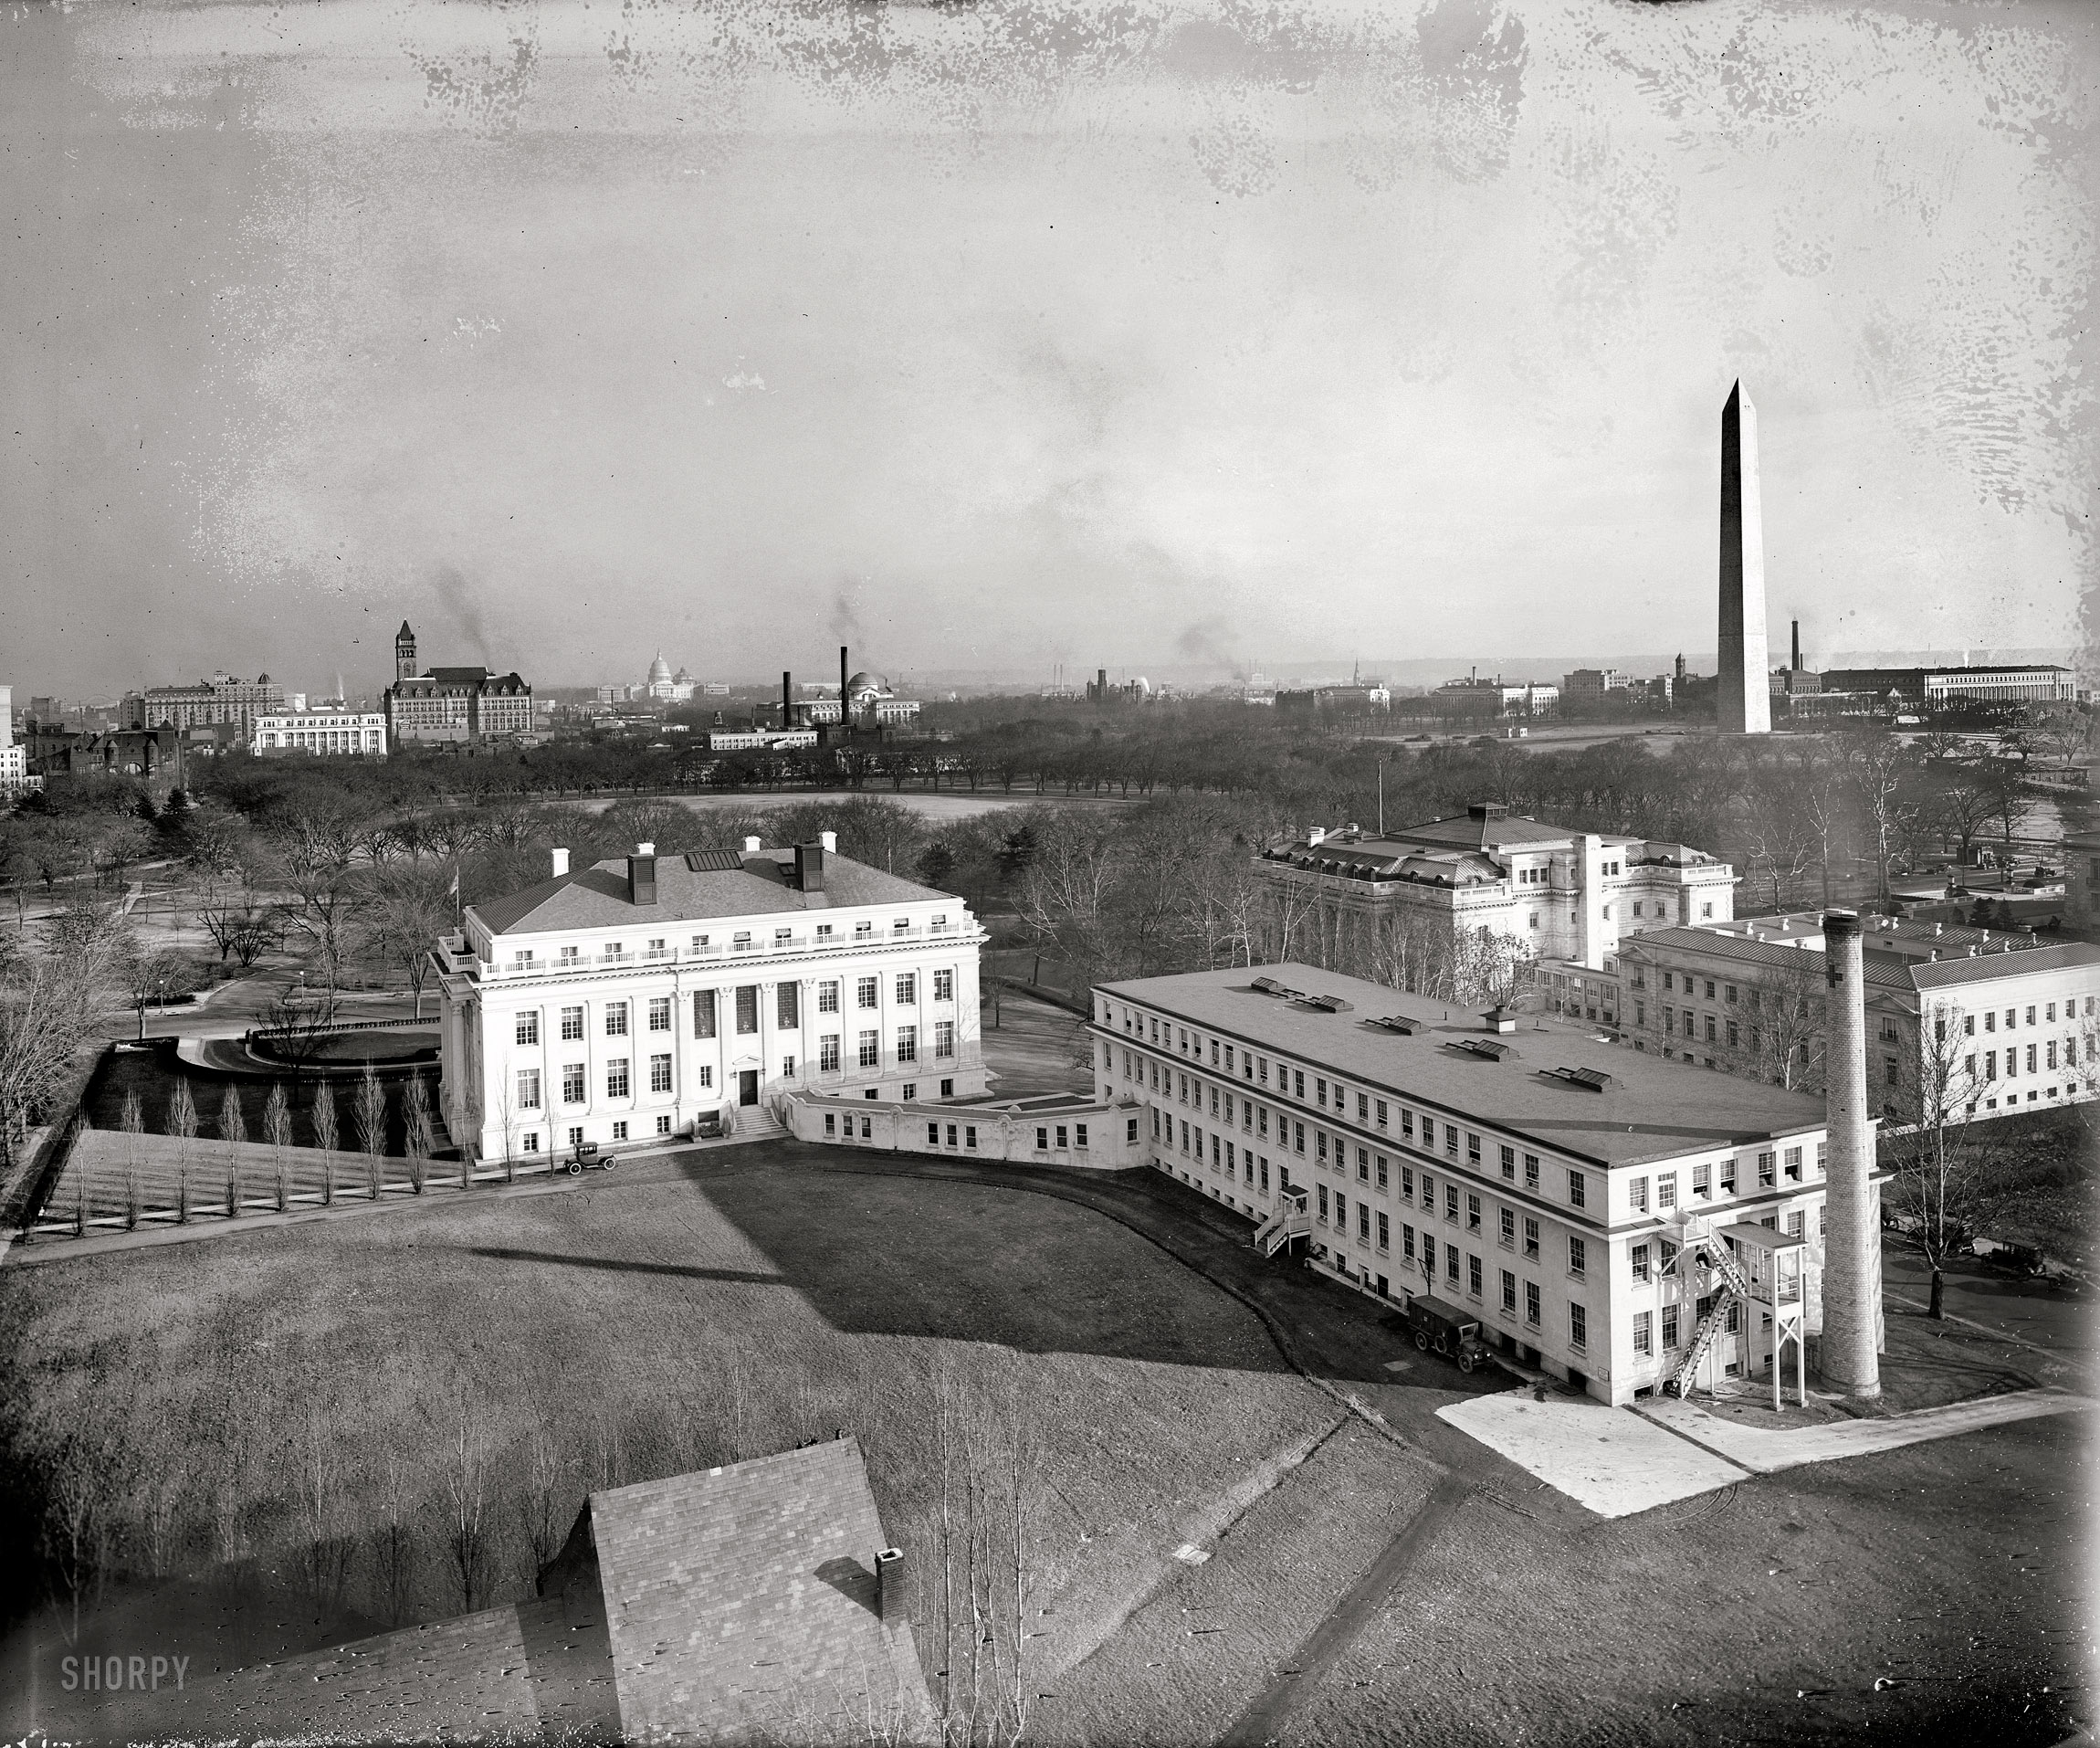 Washington, D.C., circa 1921. "Aerial view looking toward Capitol and Washington Monument." National Photo Company Collection glass negative. View full size.